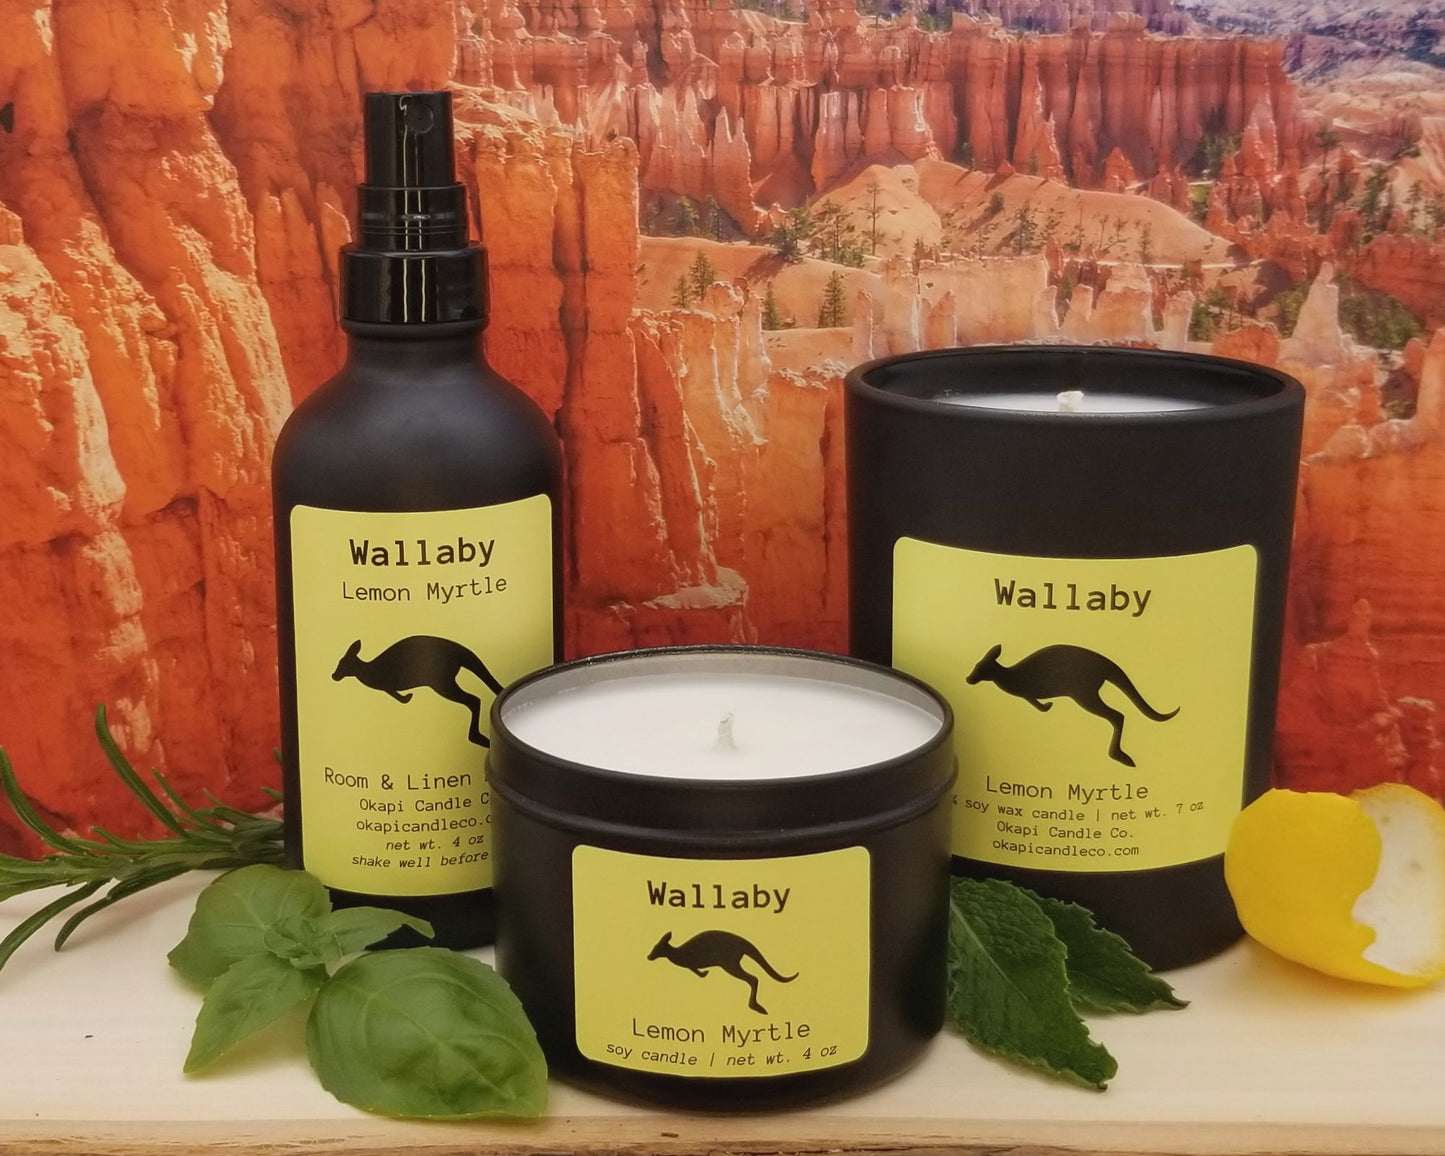 Wallaby Soy Candle - Lemon Myrtle Fragrance